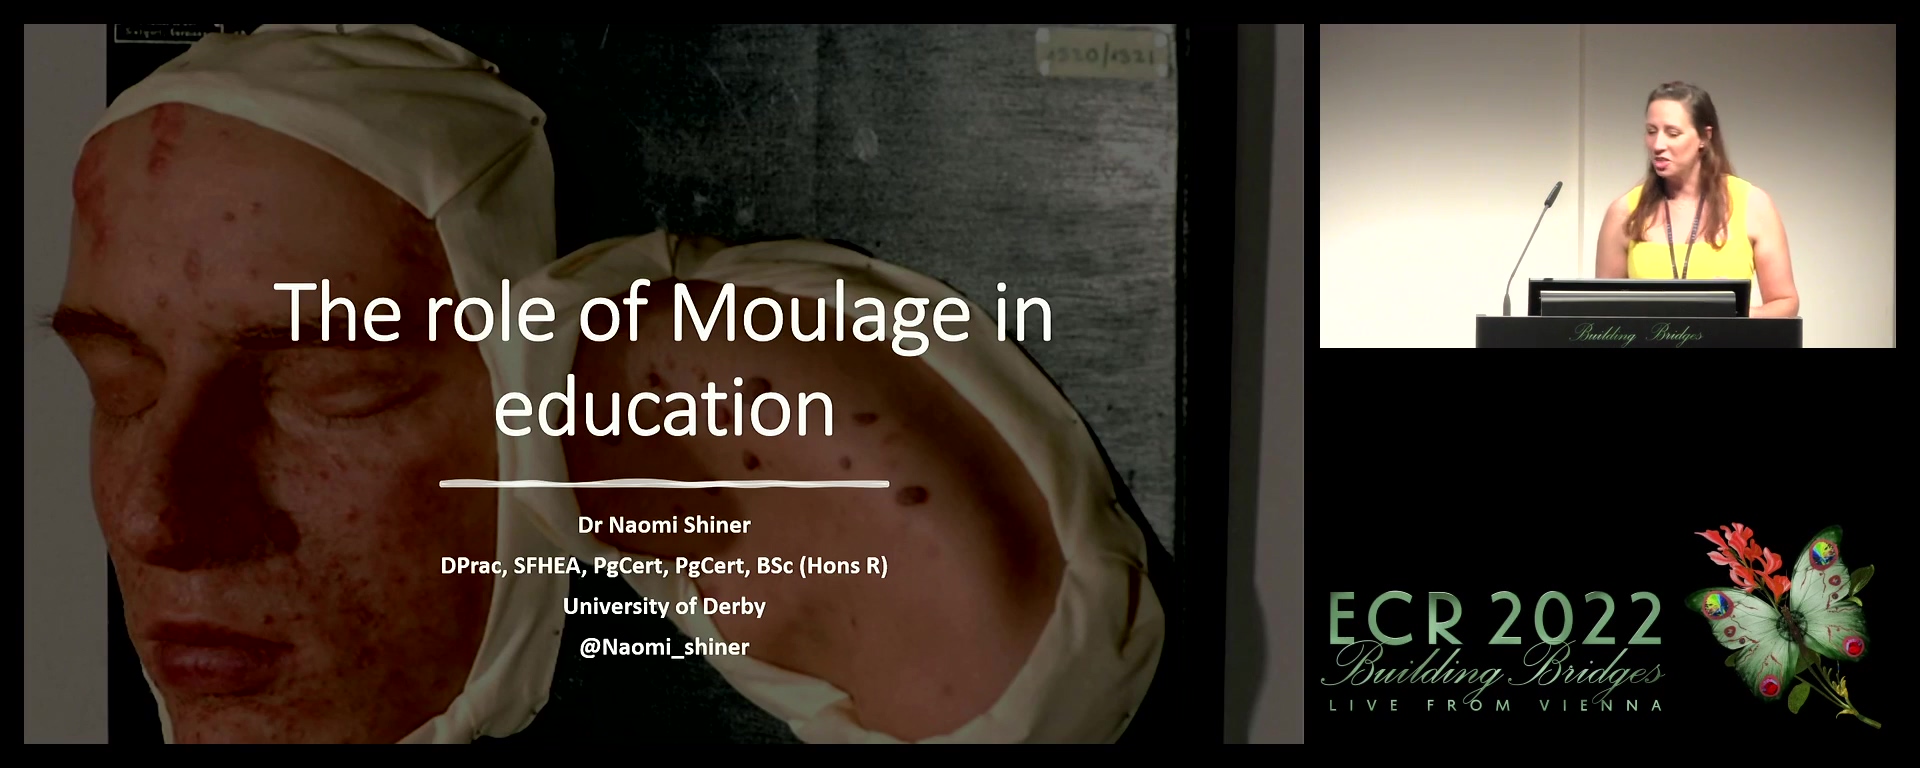 The use of moulage in teaching